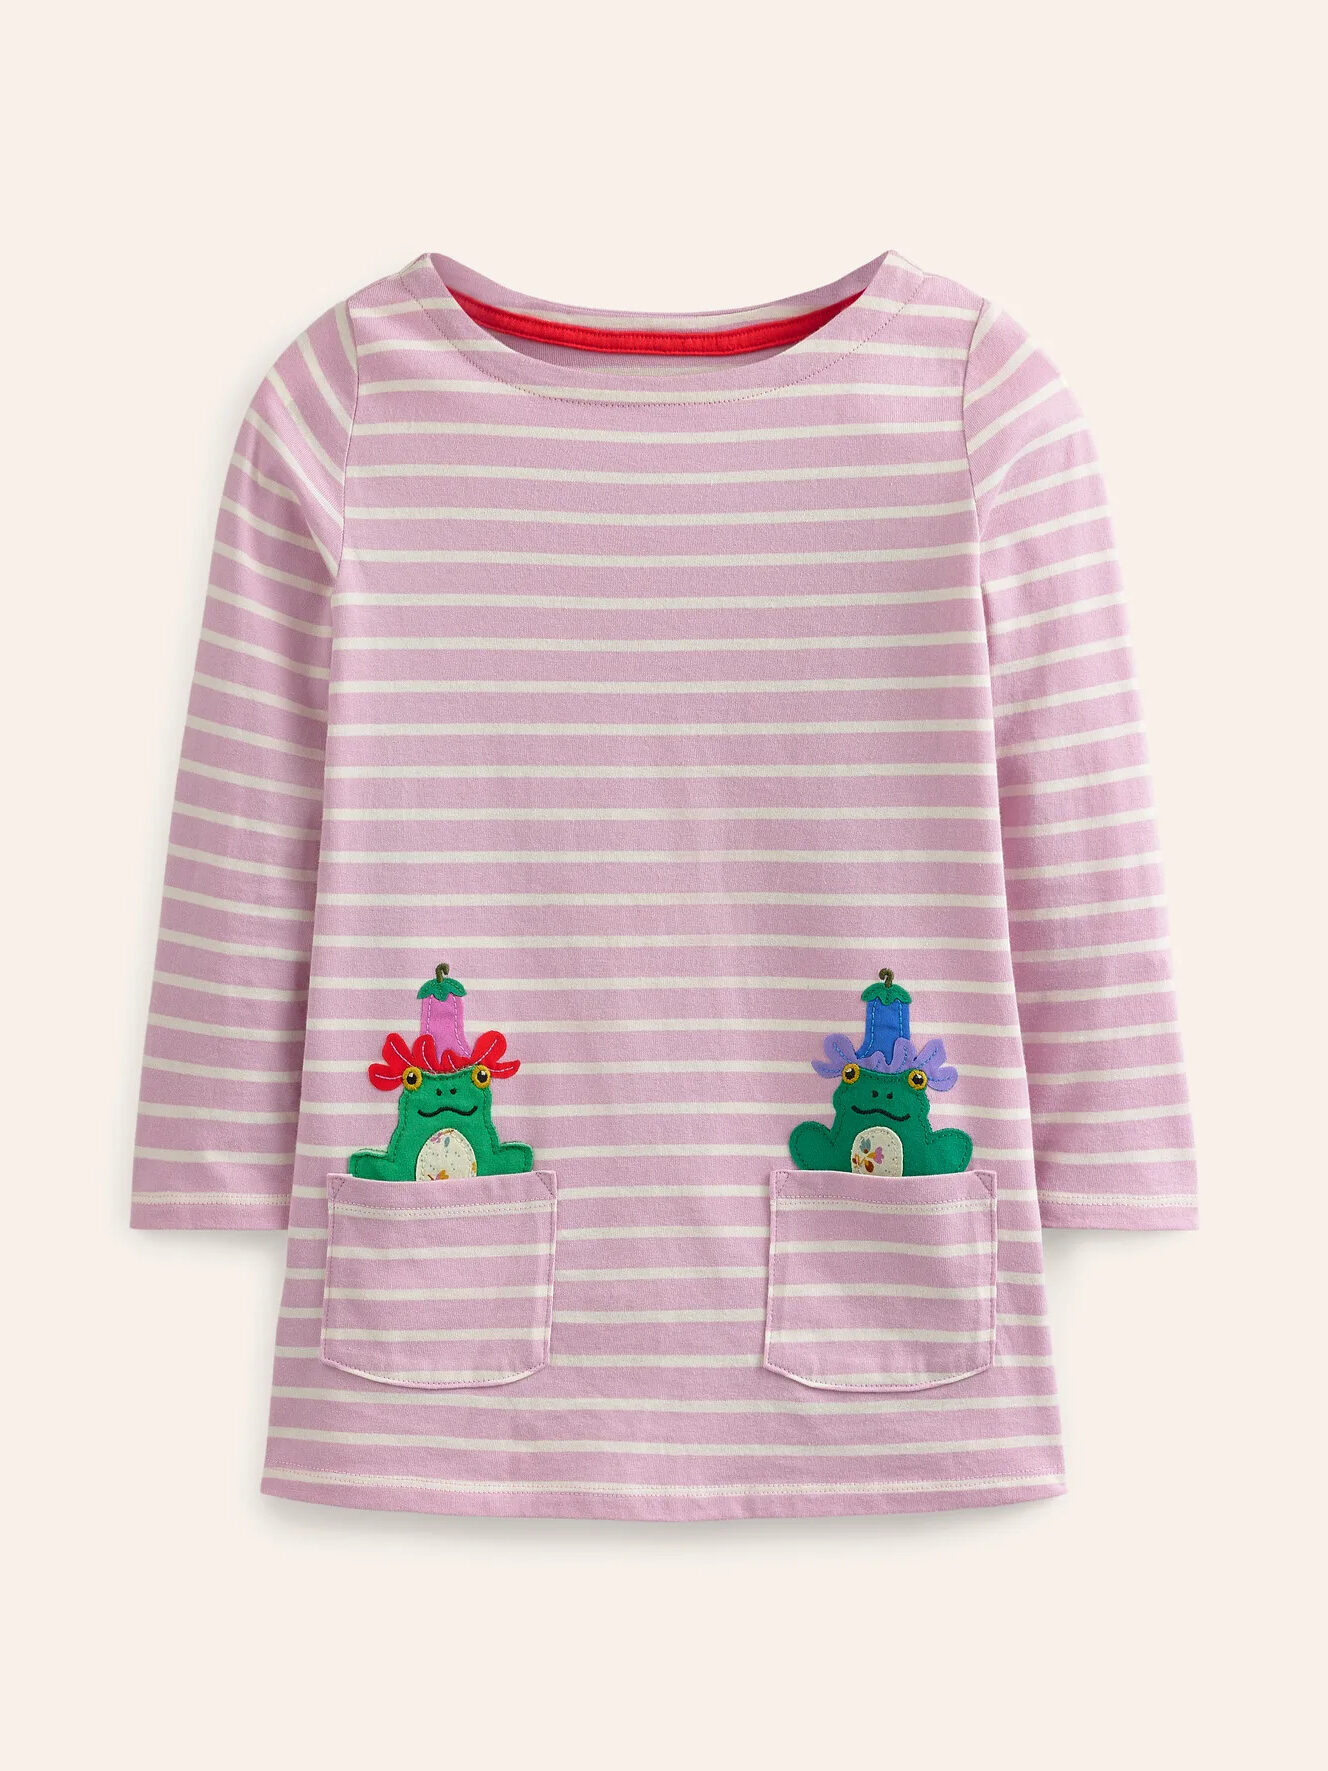 A pink striped t - shirt with embroidered flowers.